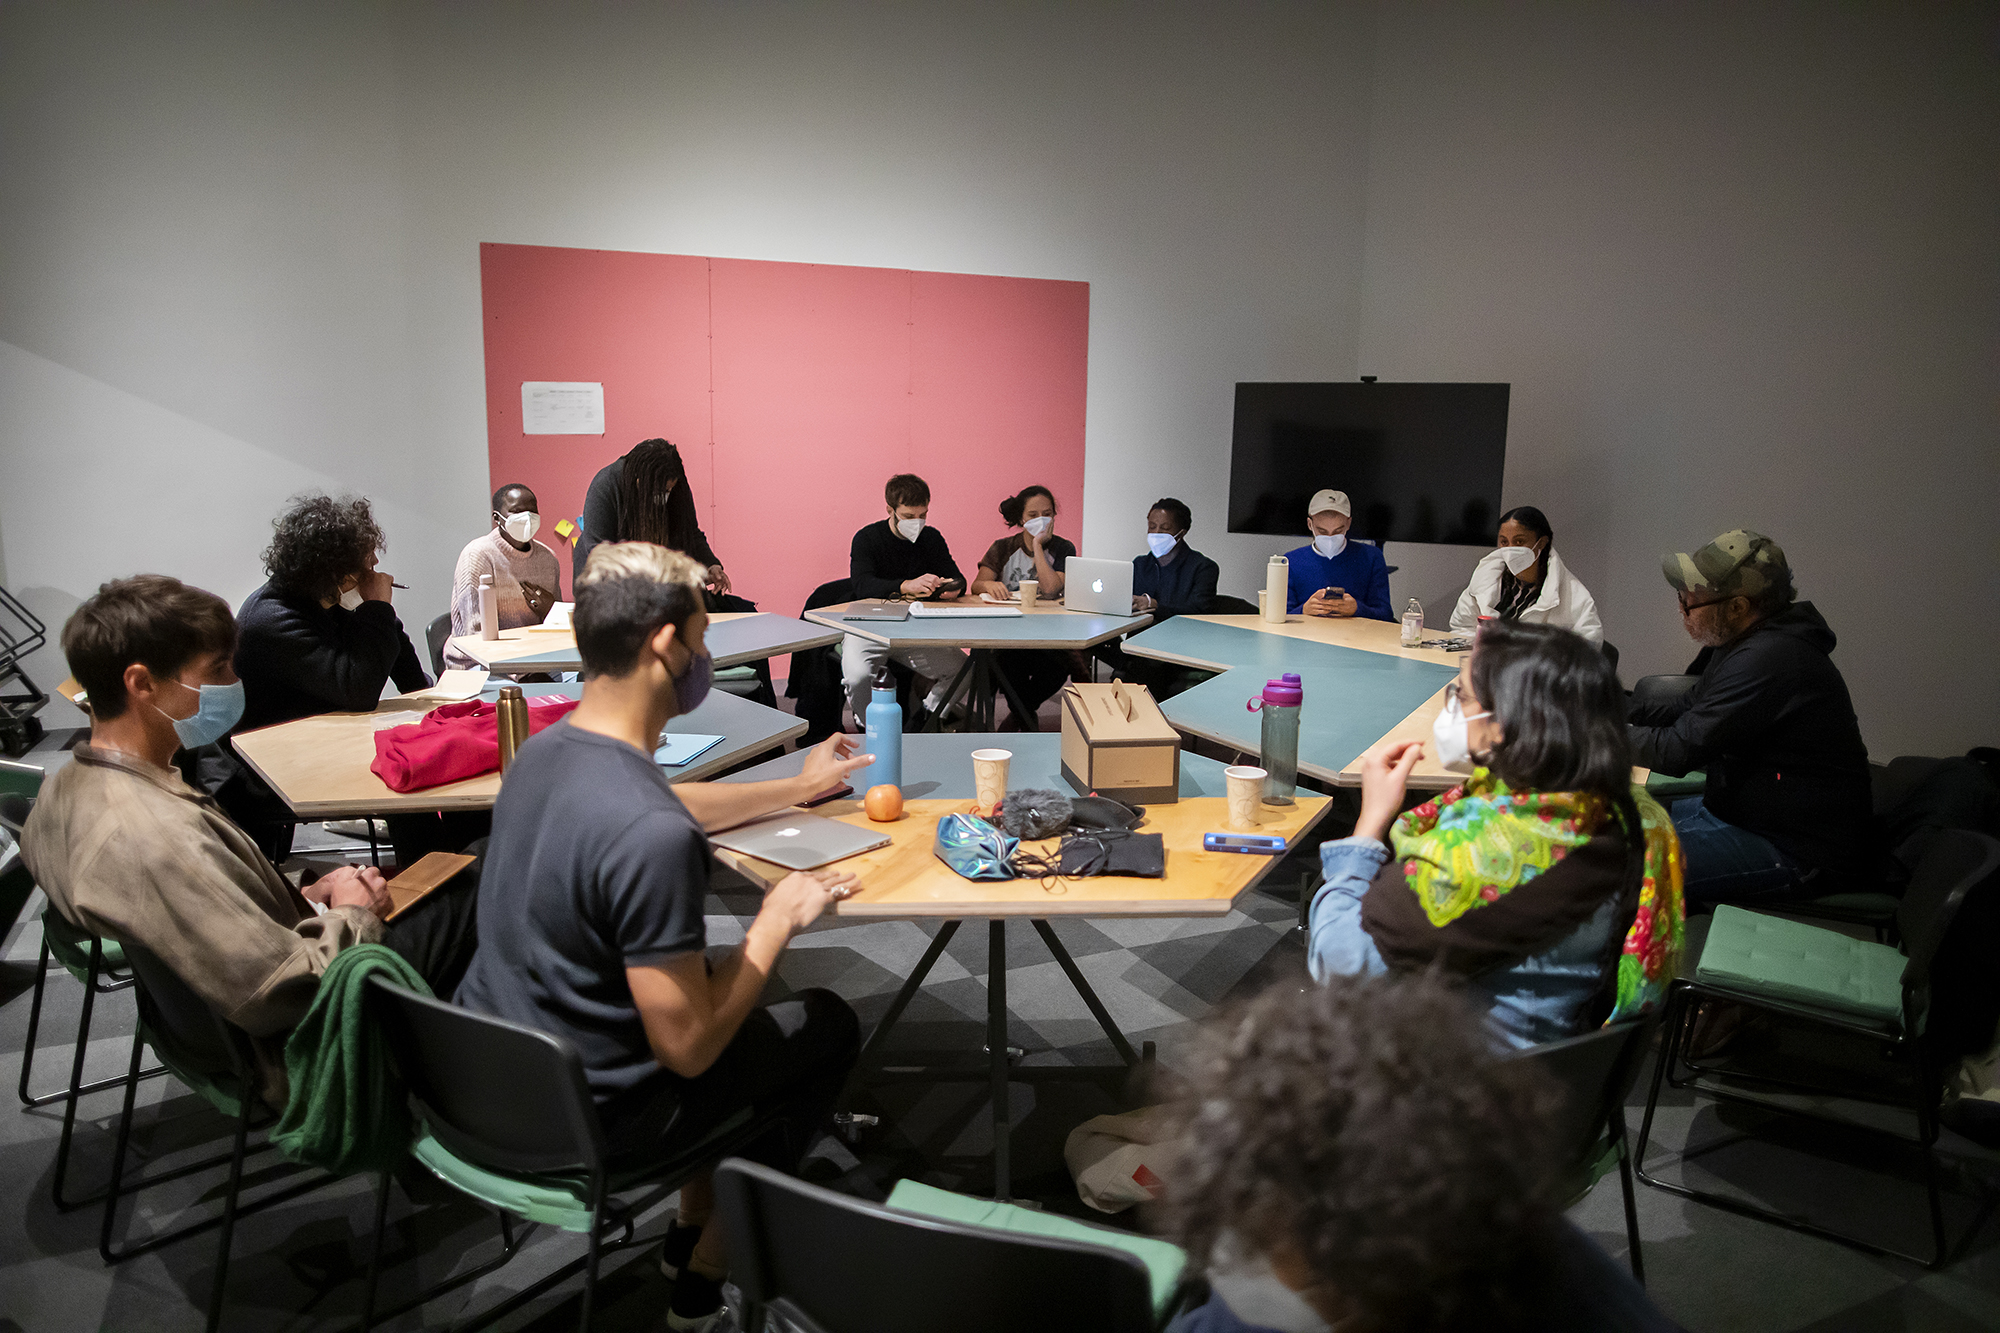 Roundtable of students inside a gallery space